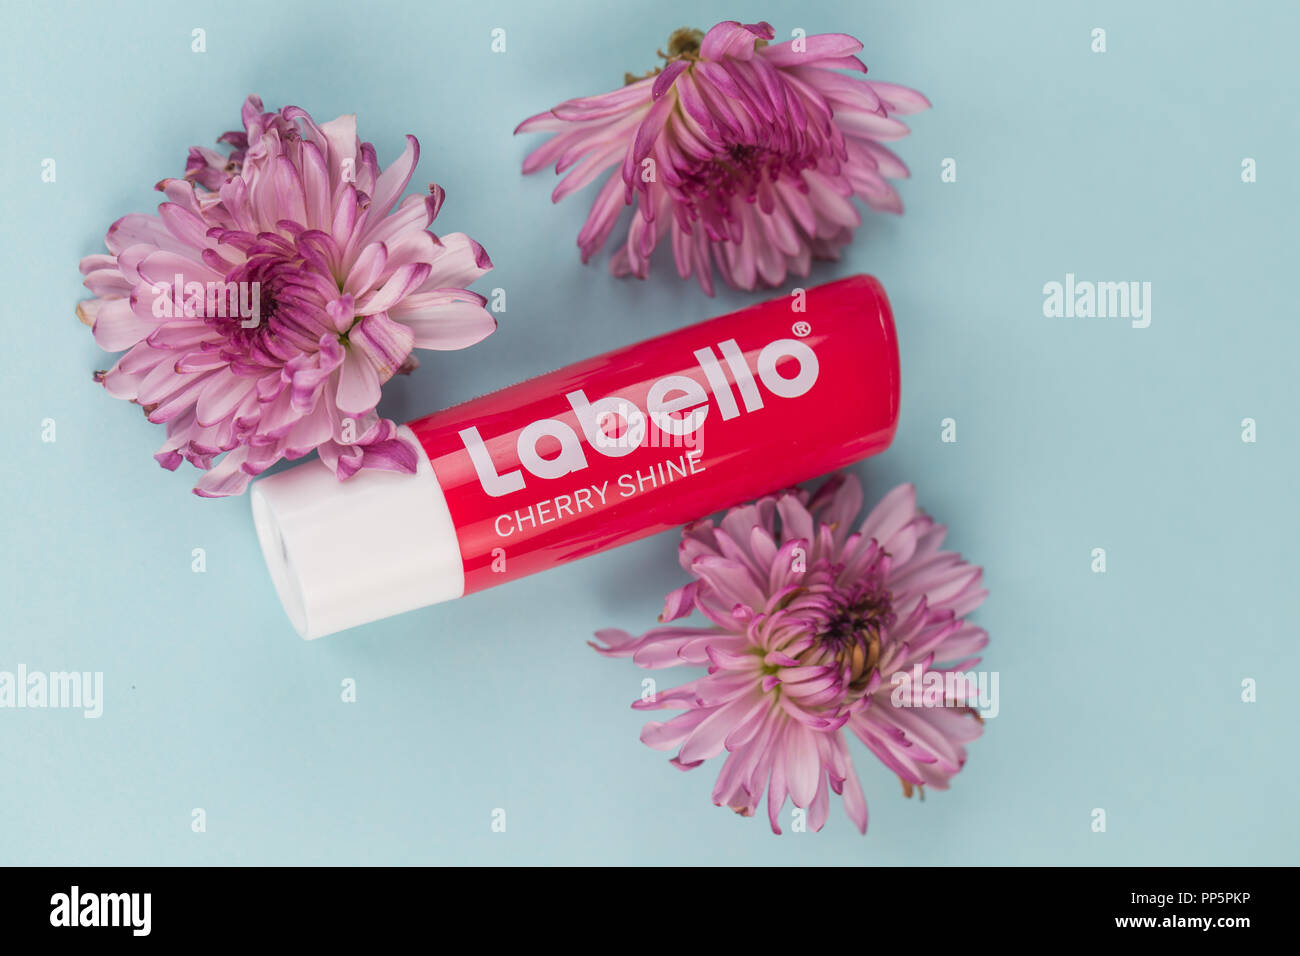 Labello lip balm placed in a soft color background with flowers. Stock Photo